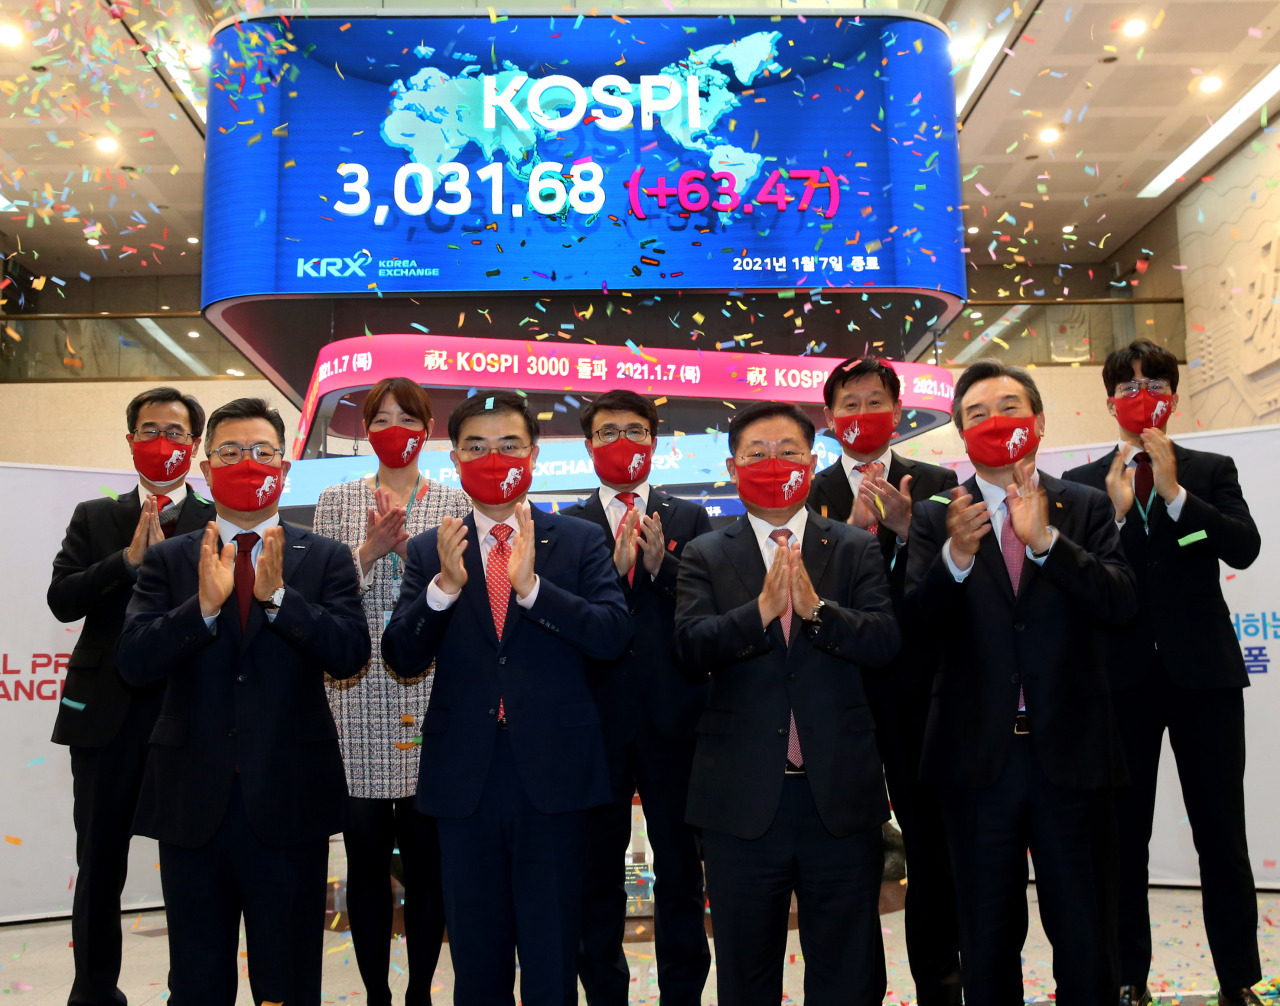 Front row, from left: Korea Investment & Securities CEO Jung Il-mun, Korea Exchange Chairman Sohn Byung-doo, Korean Financial Investment Association Chairman Na Jae-chul, Bookook Securities CEO Park Hyeon-chul and officials from market operator the Korea Exchange celebrate South Korea’s benchmark Kospi’s closing above 3,000 points for the first time at the KRX’s Seoul office on Jan. 7, 2021. (KRX)